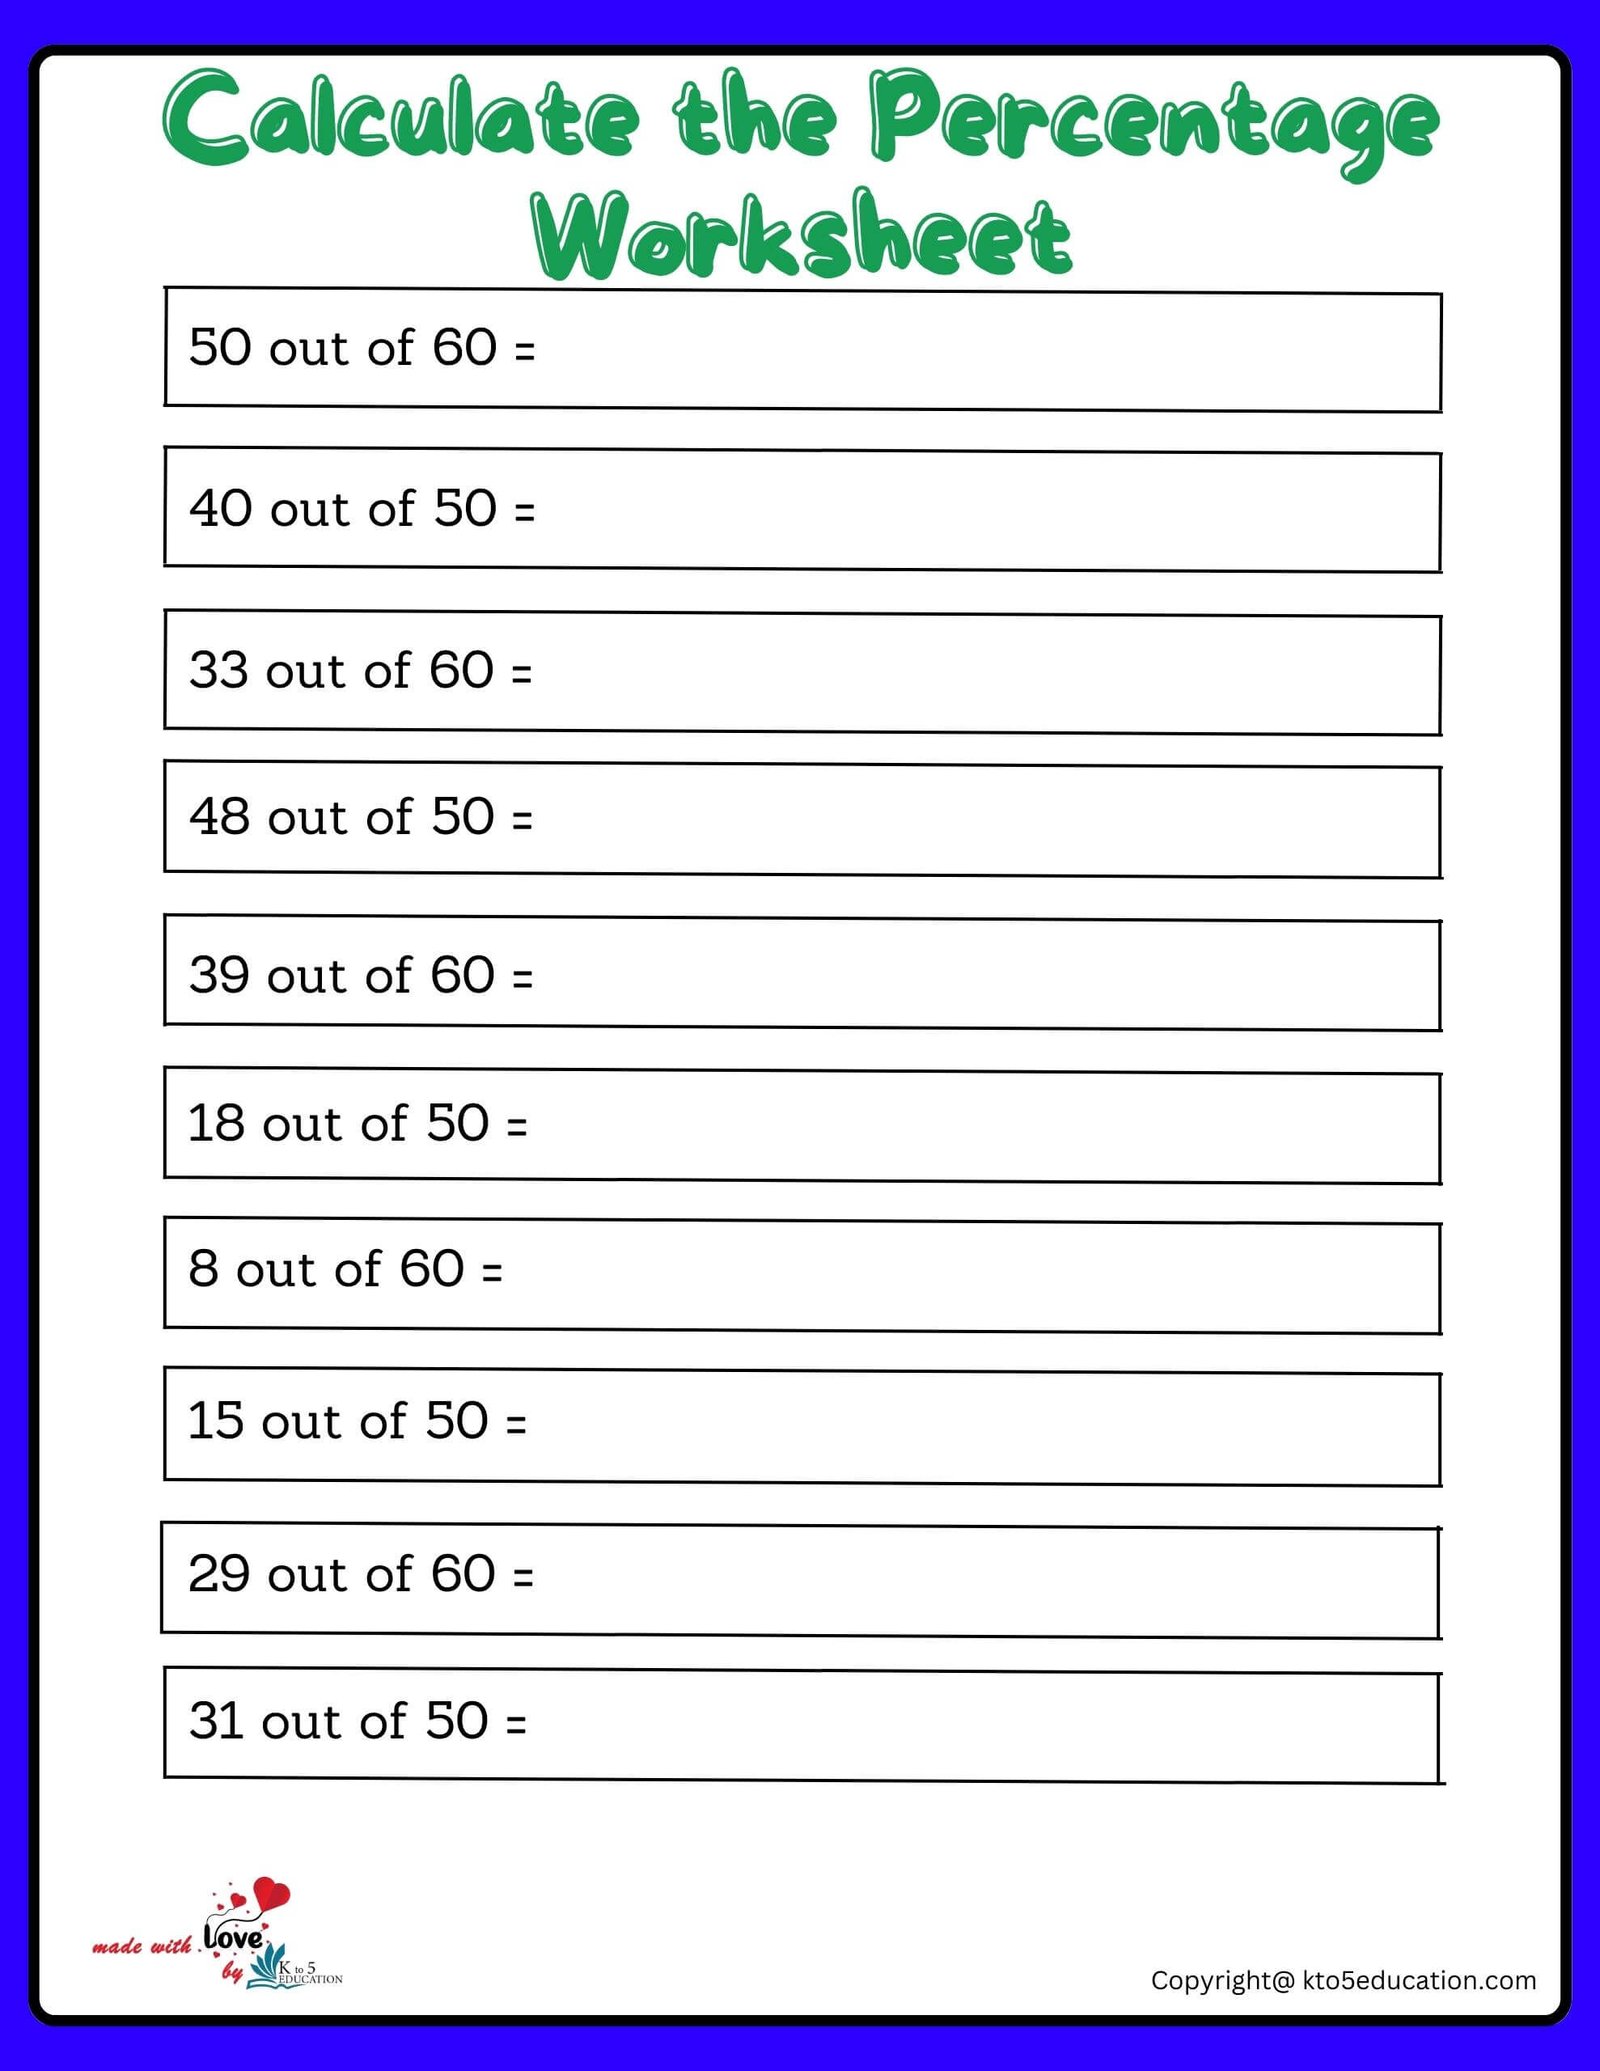 Calculate A Percentage Of 50 To 60 Worksheet